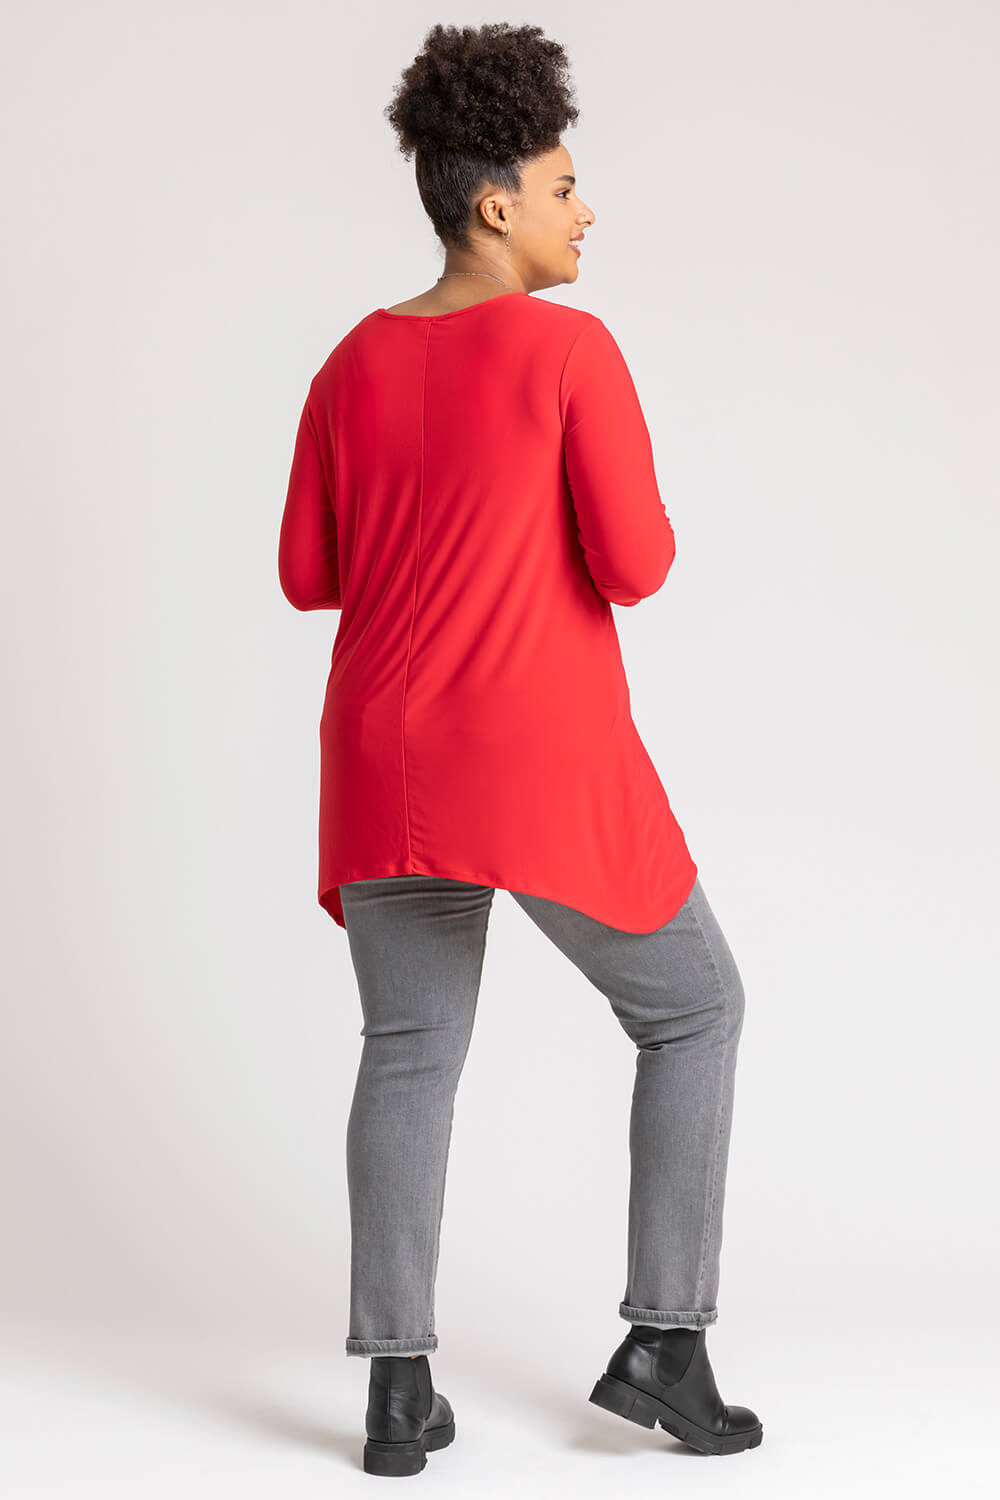 Red Curve Eyelet Embellished Asymmetric Top, Image 2 of 4